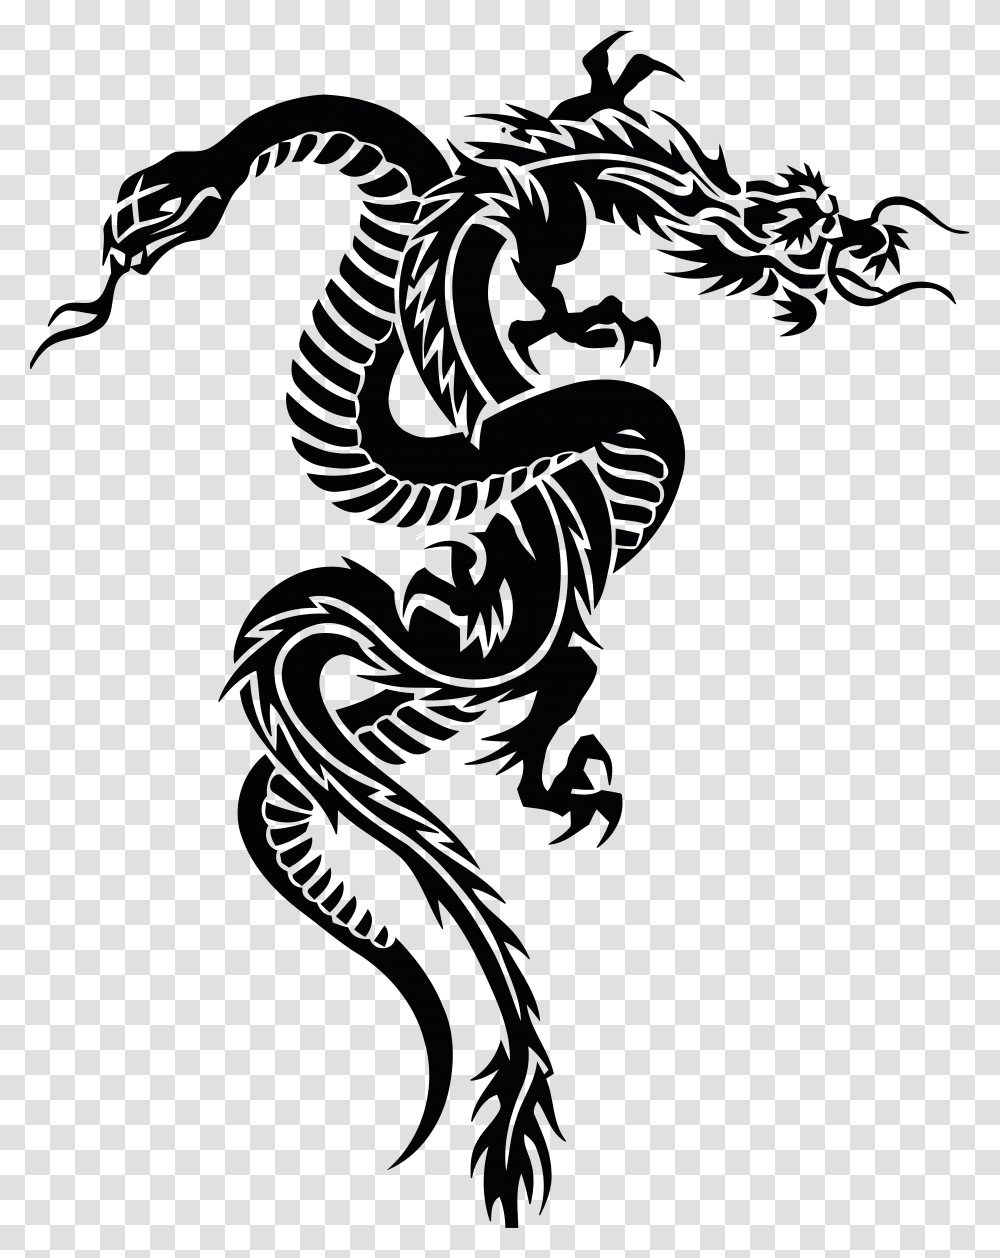 Snake And Dragon Tribal Tattoo Clipart And Design Snake Tattoo, Stencil Transparent Png